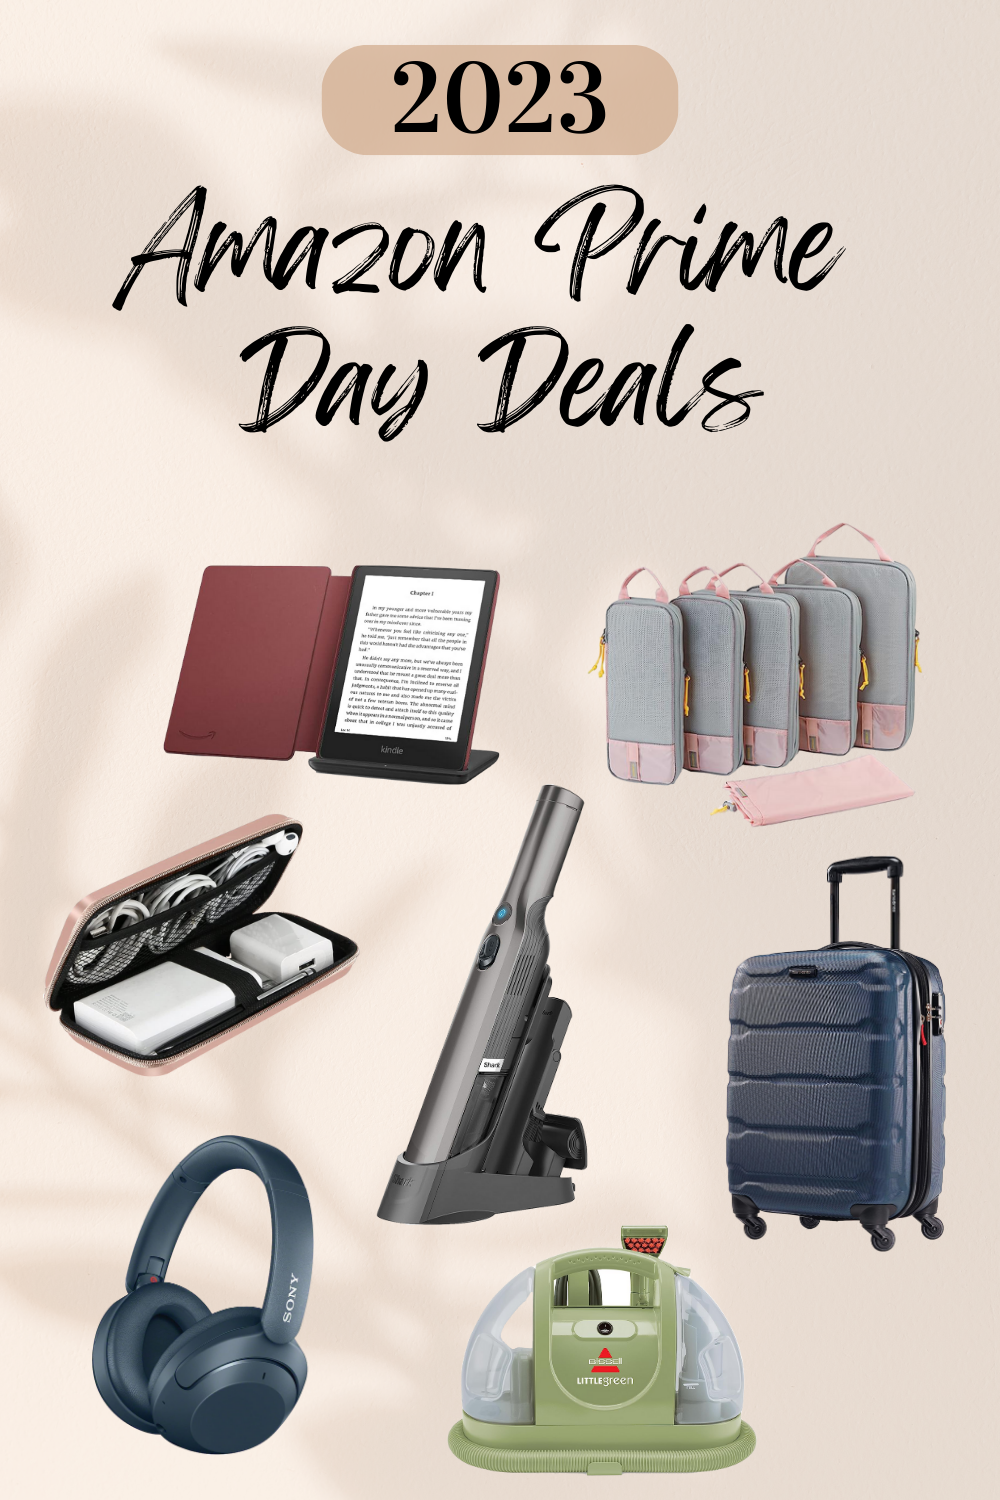 The Best Amazon Prime Day Deals for Travel in 2023